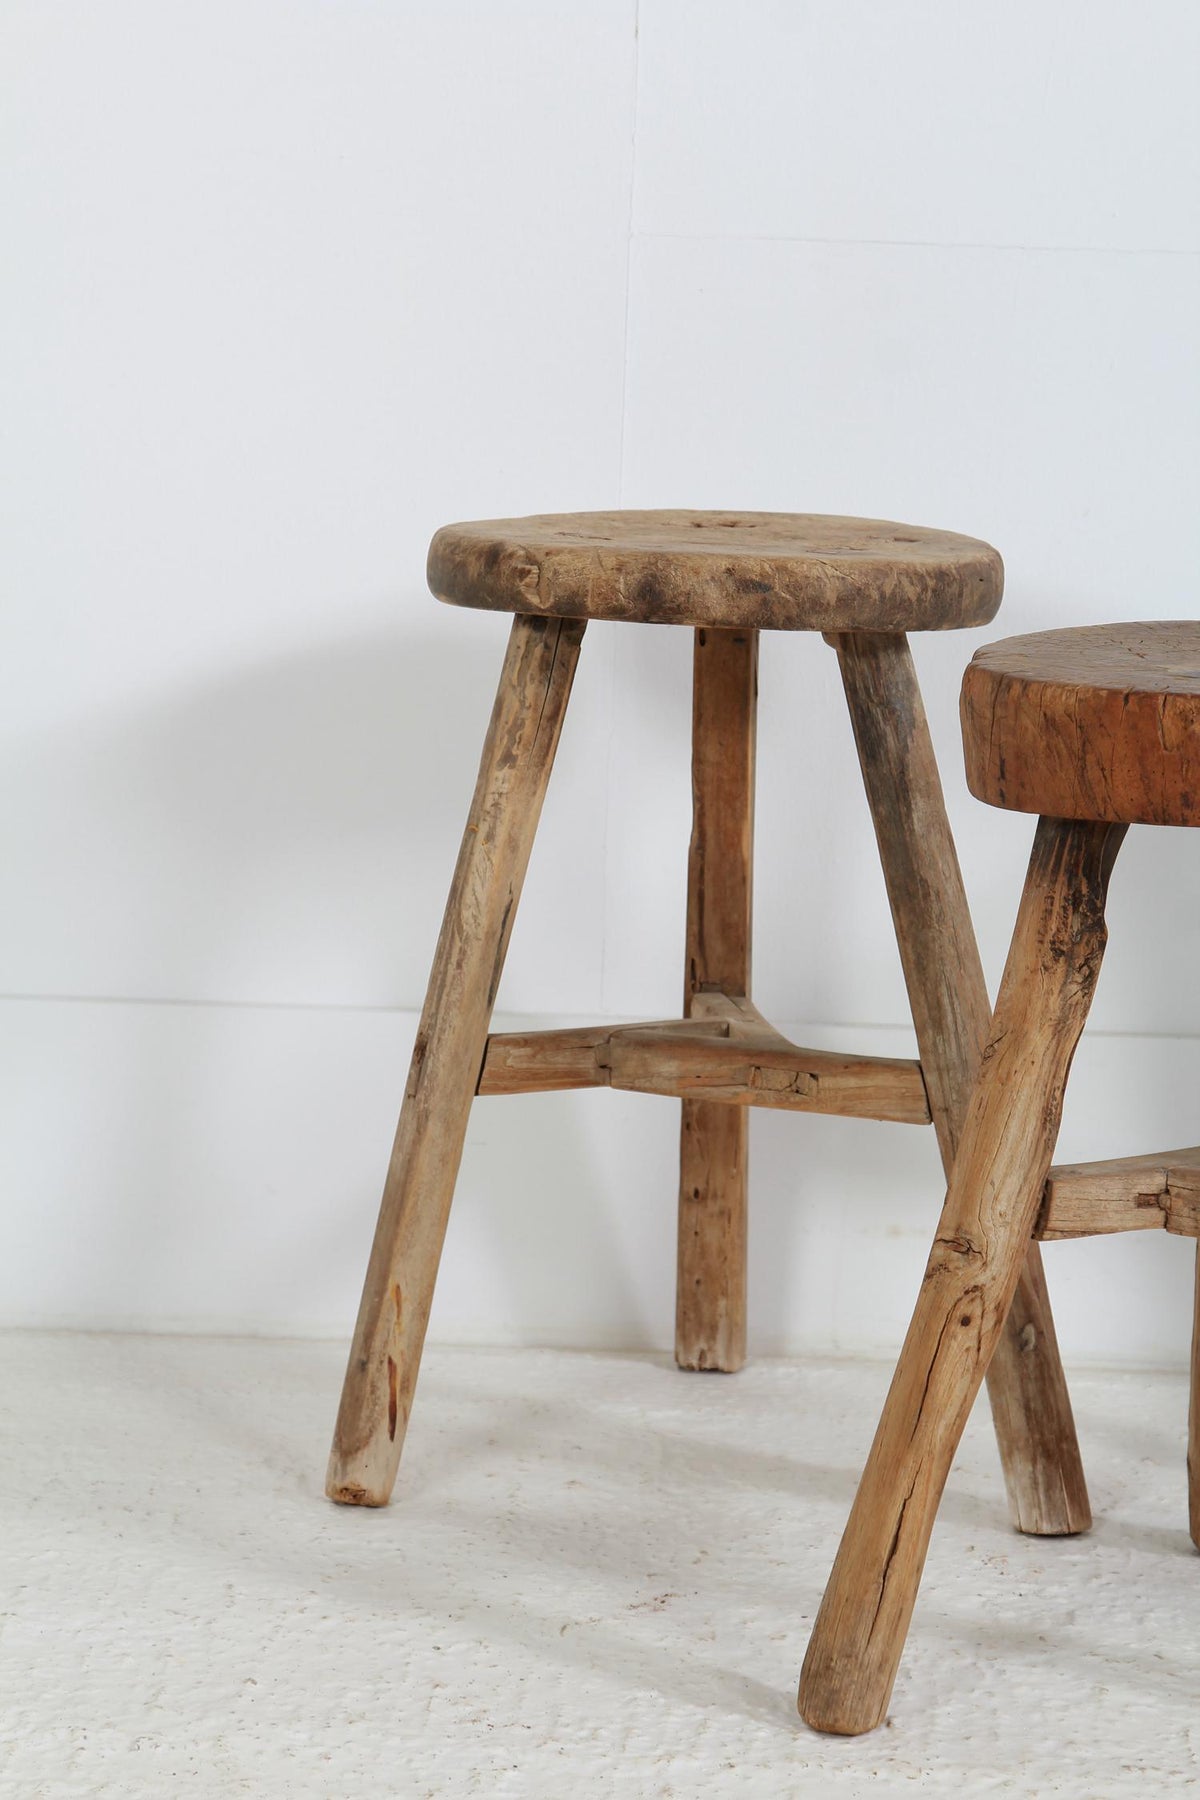 Collection of Three Rustic Chinese Workers Stools